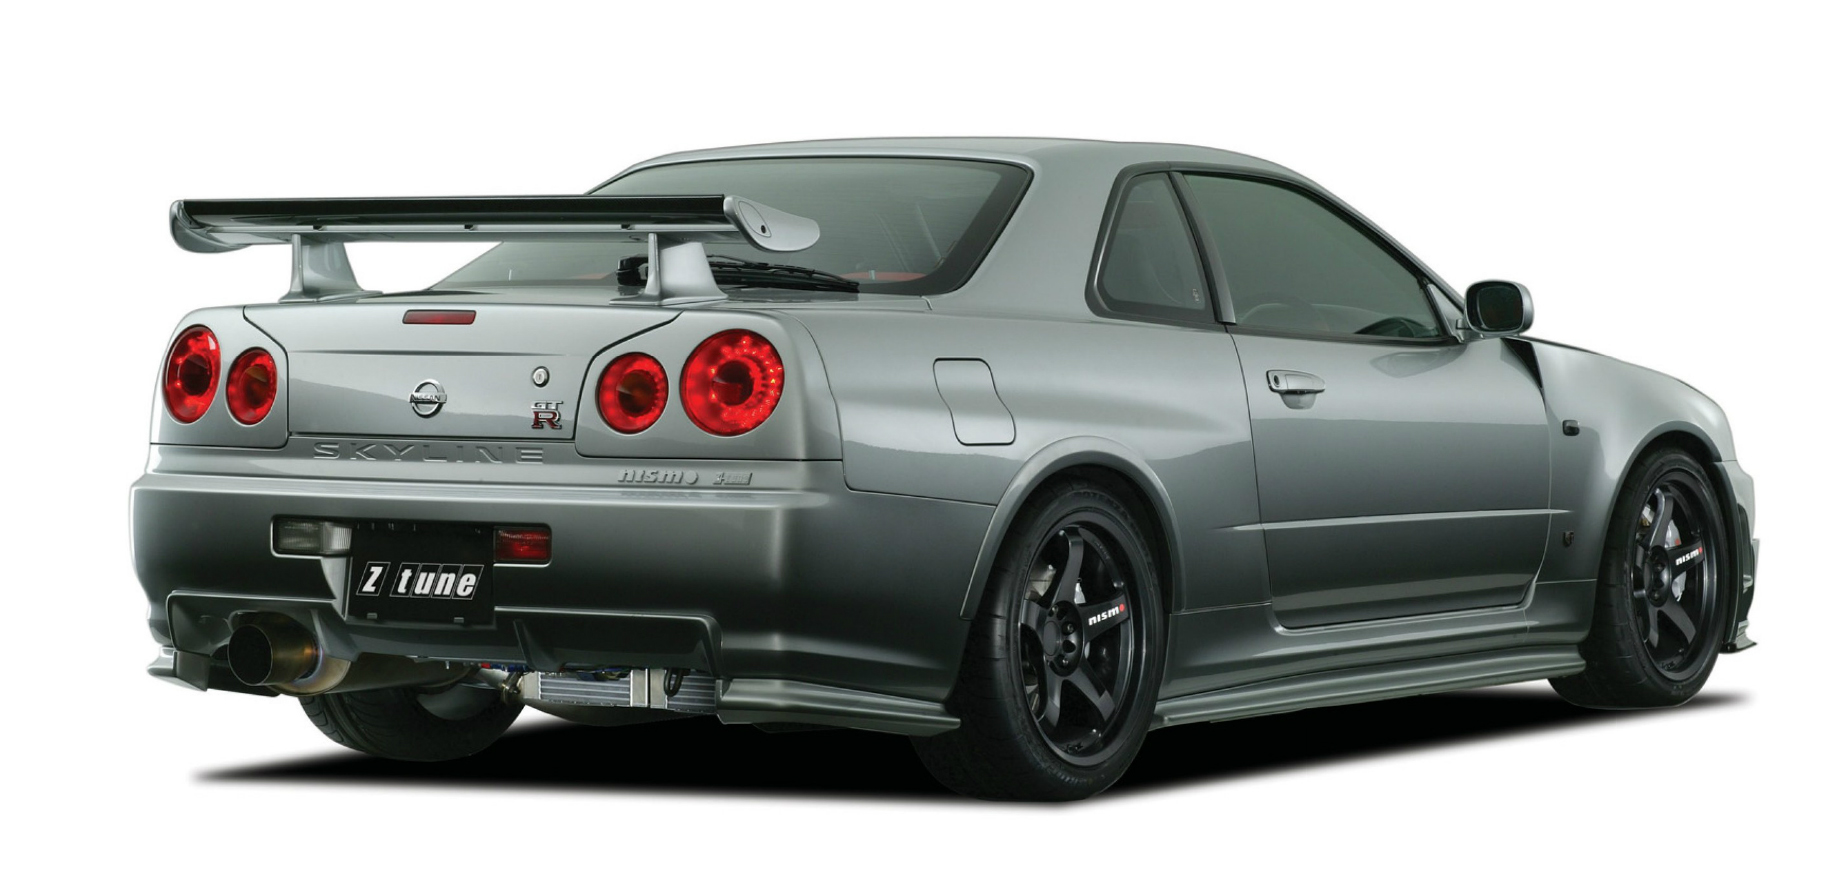 Nismo R34 Gt R Z Tune Type Front Fender Set Z1 Motorsports Performance Oem And Aftermarket Engineered Parts Global Leader In 300zx 350z 370z G35 G37 Q50 Q60